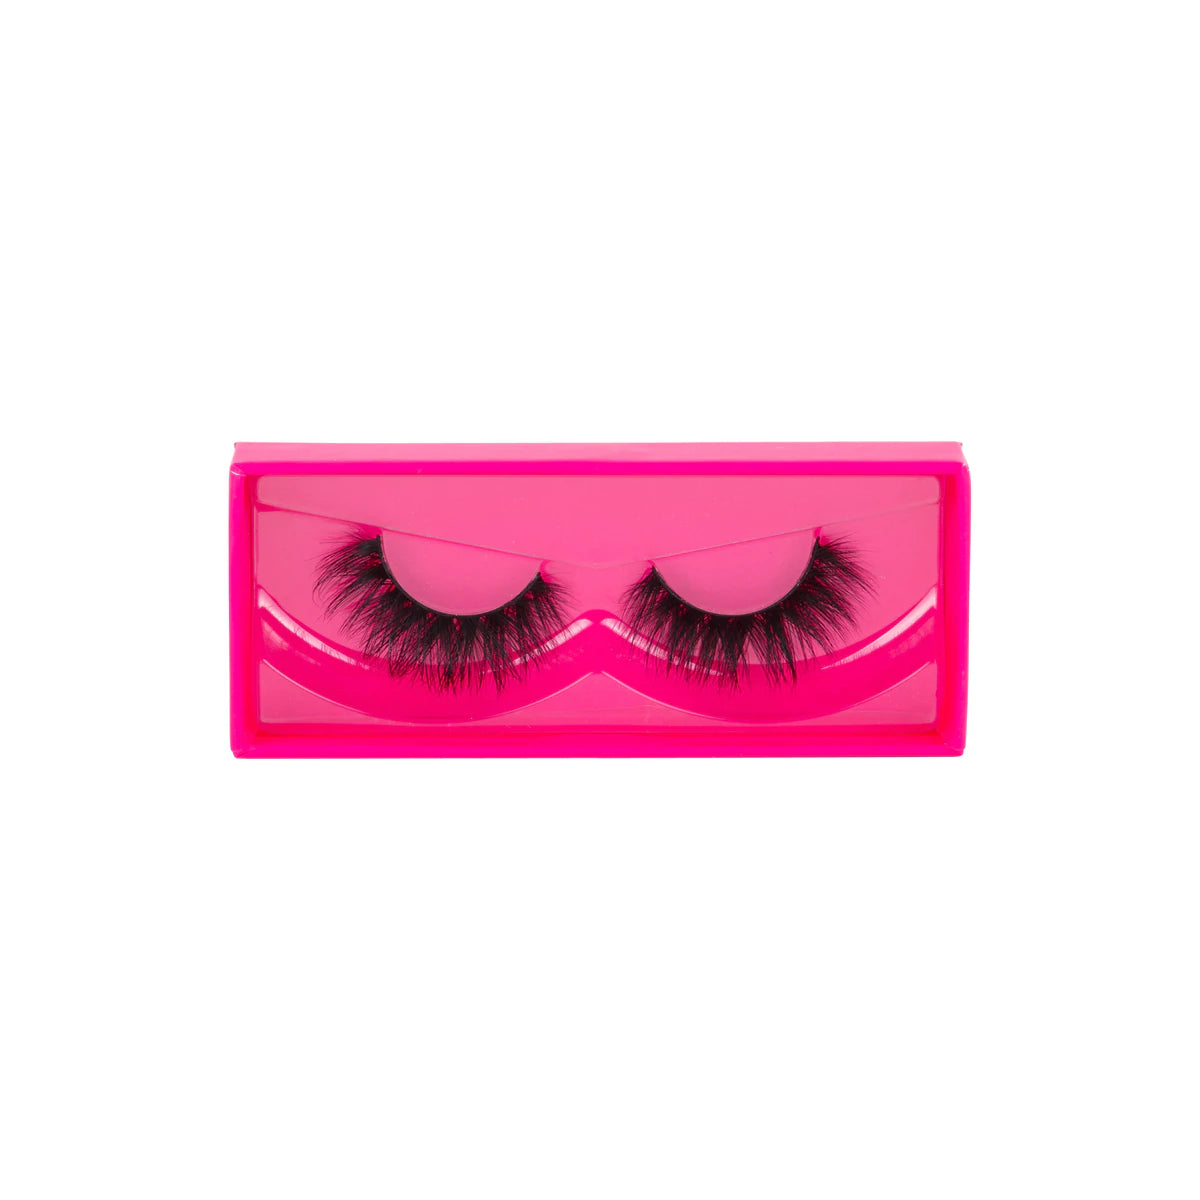 3D Faux Mink Eyelashes by Beauty Creations